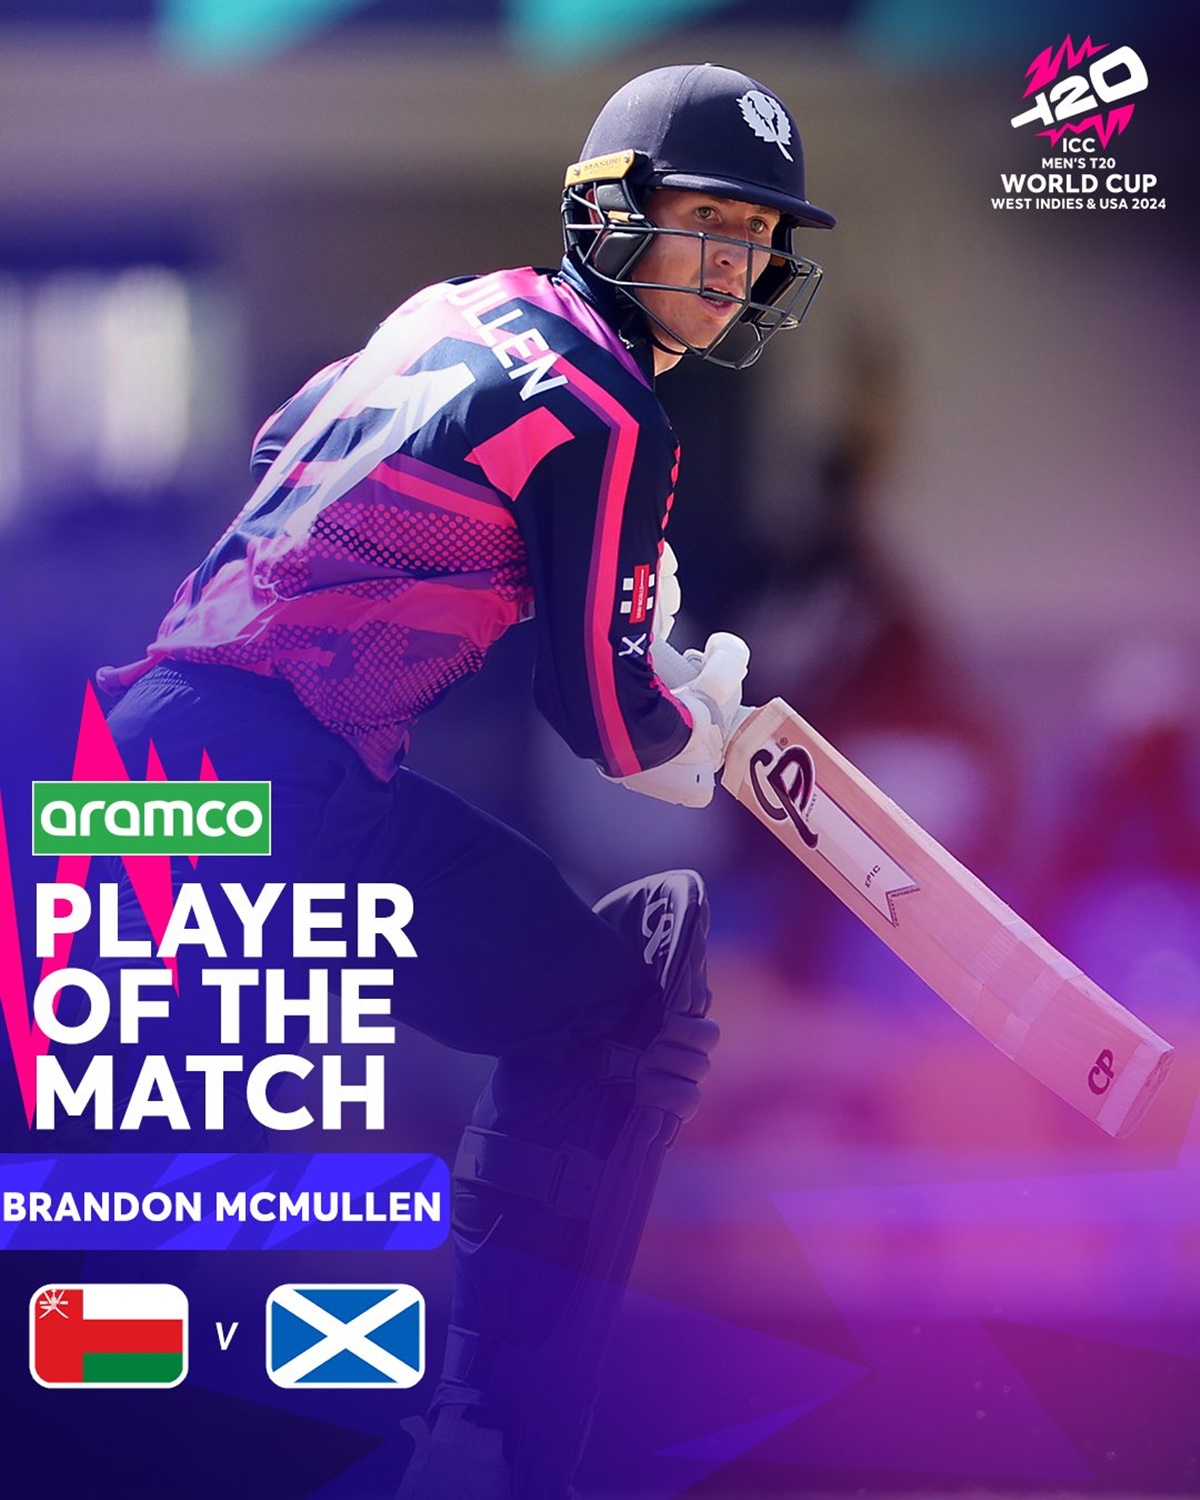 Brandon McMullen led Scotland’s chase against Oman, scoring an unbeaten 61, in the T20 World Cup match in Antigua on Sunday. 